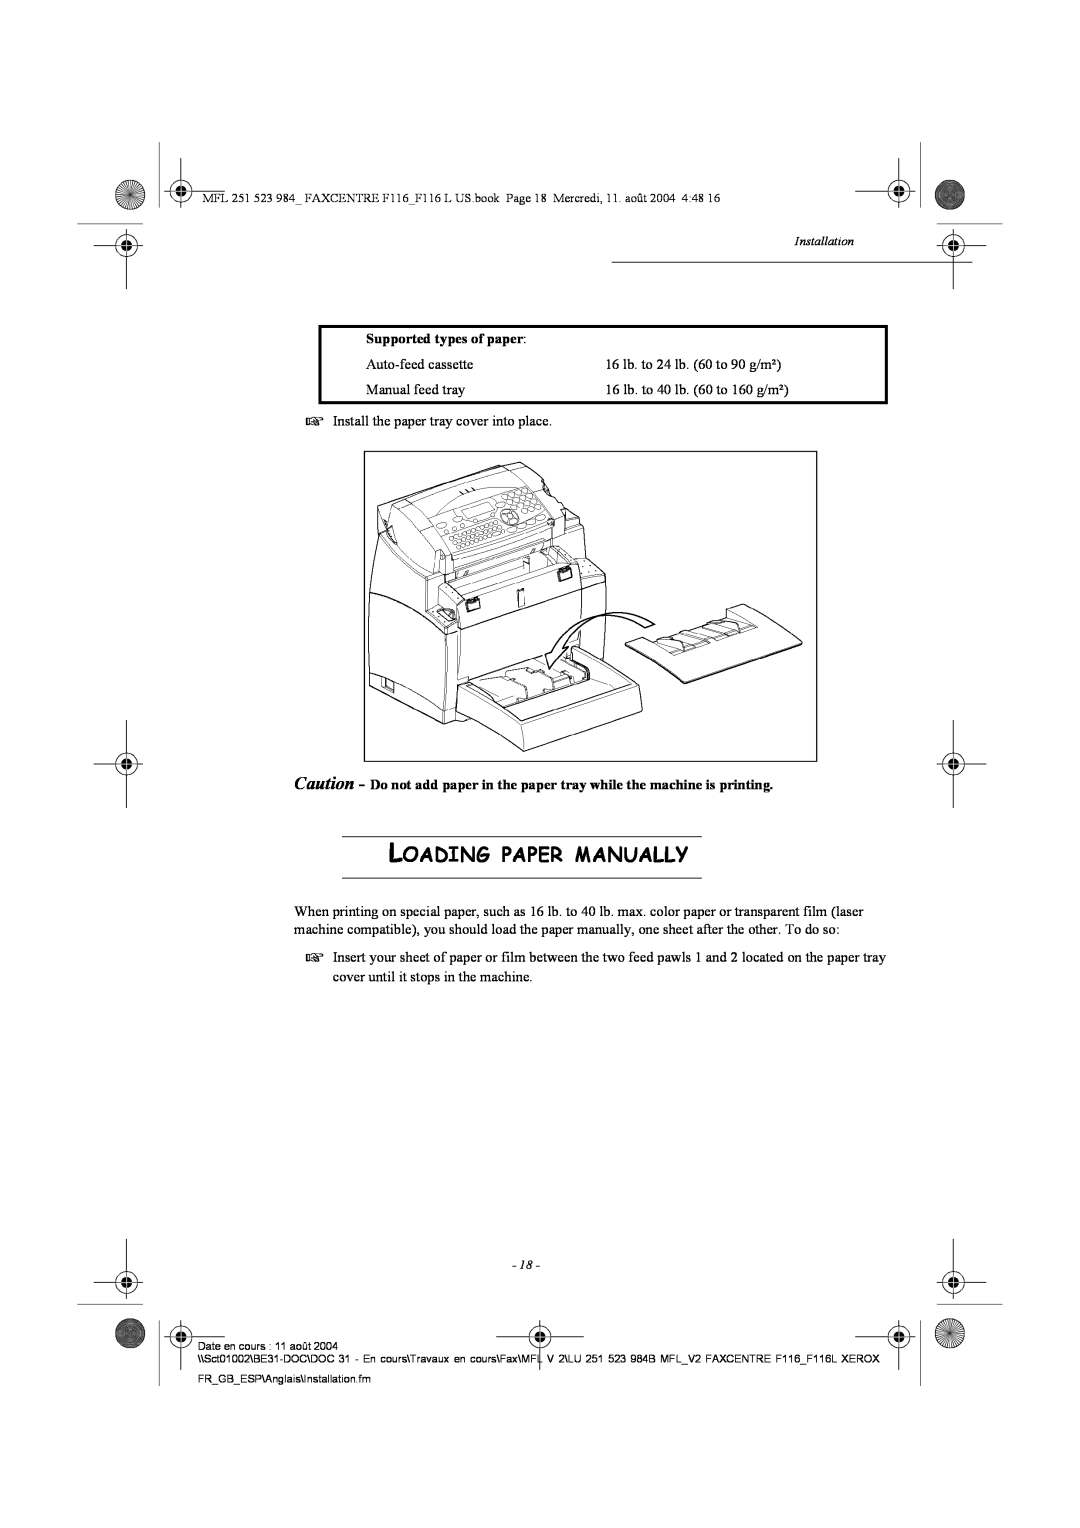 Xerox F116 user manual Loading Paper Manually, Supported types of paper 